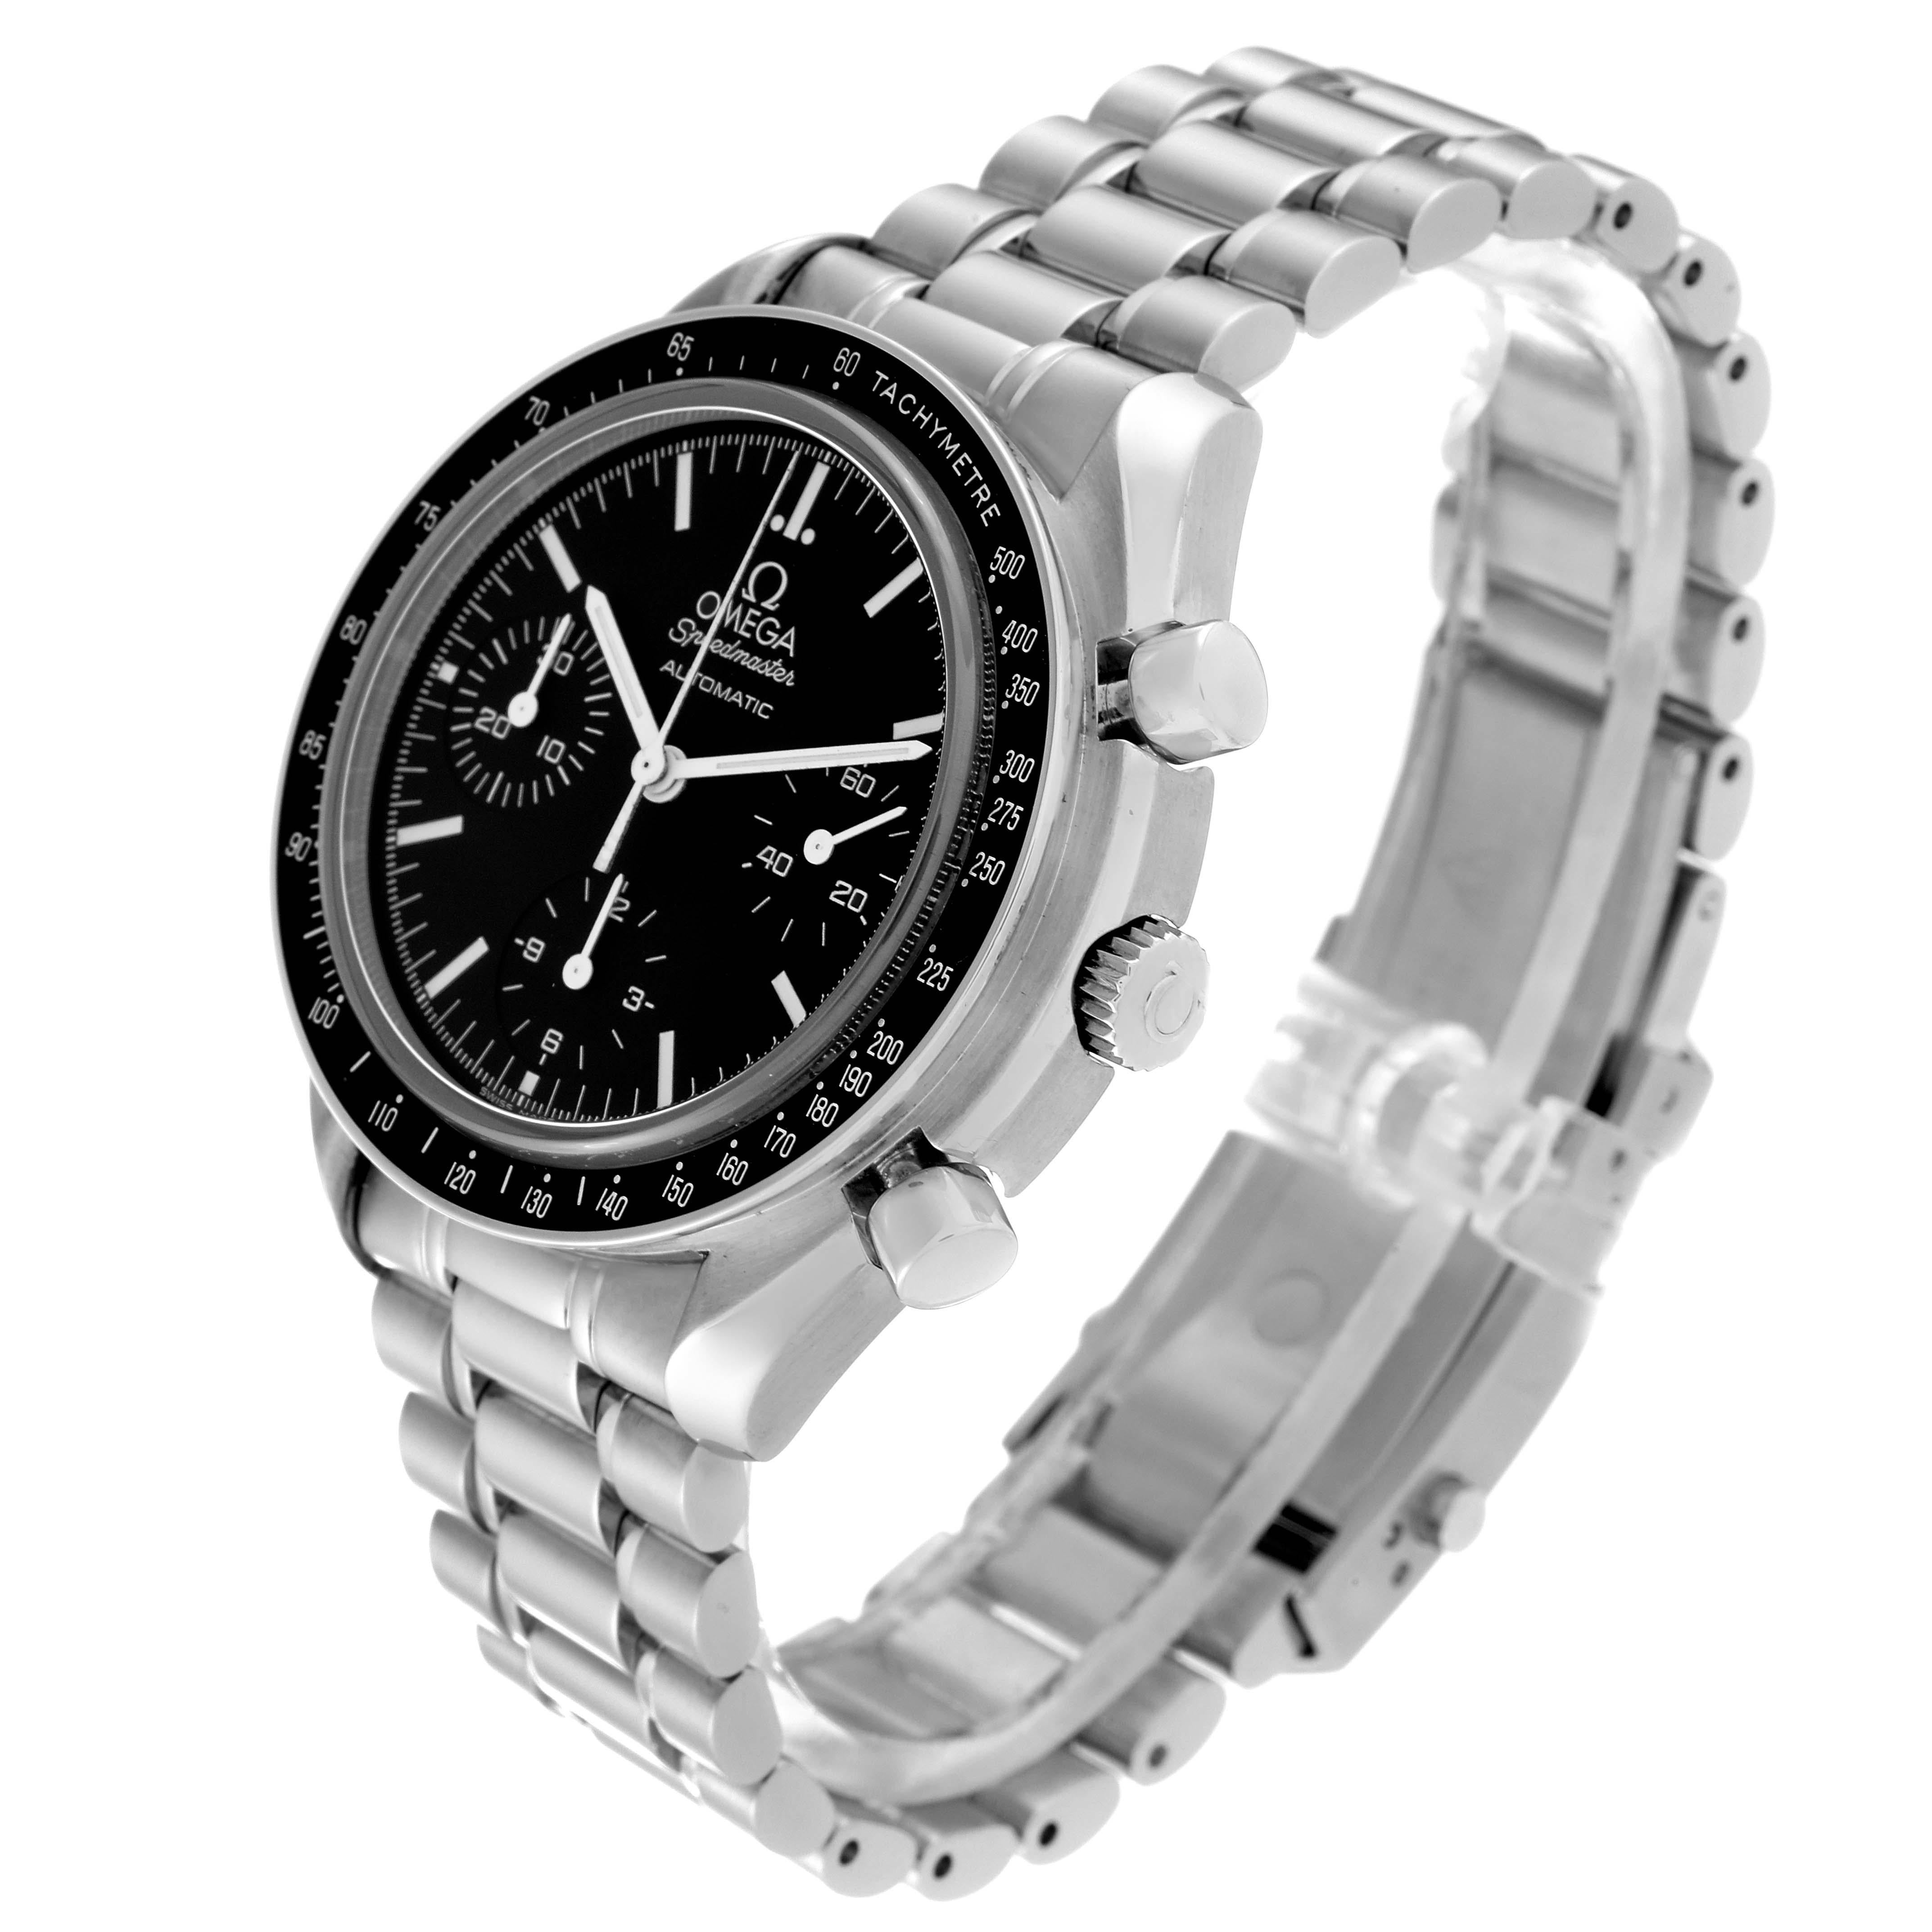 Omega Speedmaster Reduced Chronograph Steel Mens Watch 3539.50.00 Card. Automatic self-winding chronograph movement. Stainless steel round case 39.0 mm in diameter. Black bezel with tachymeter function. Scratch resistant sapphire crystal. Black dial